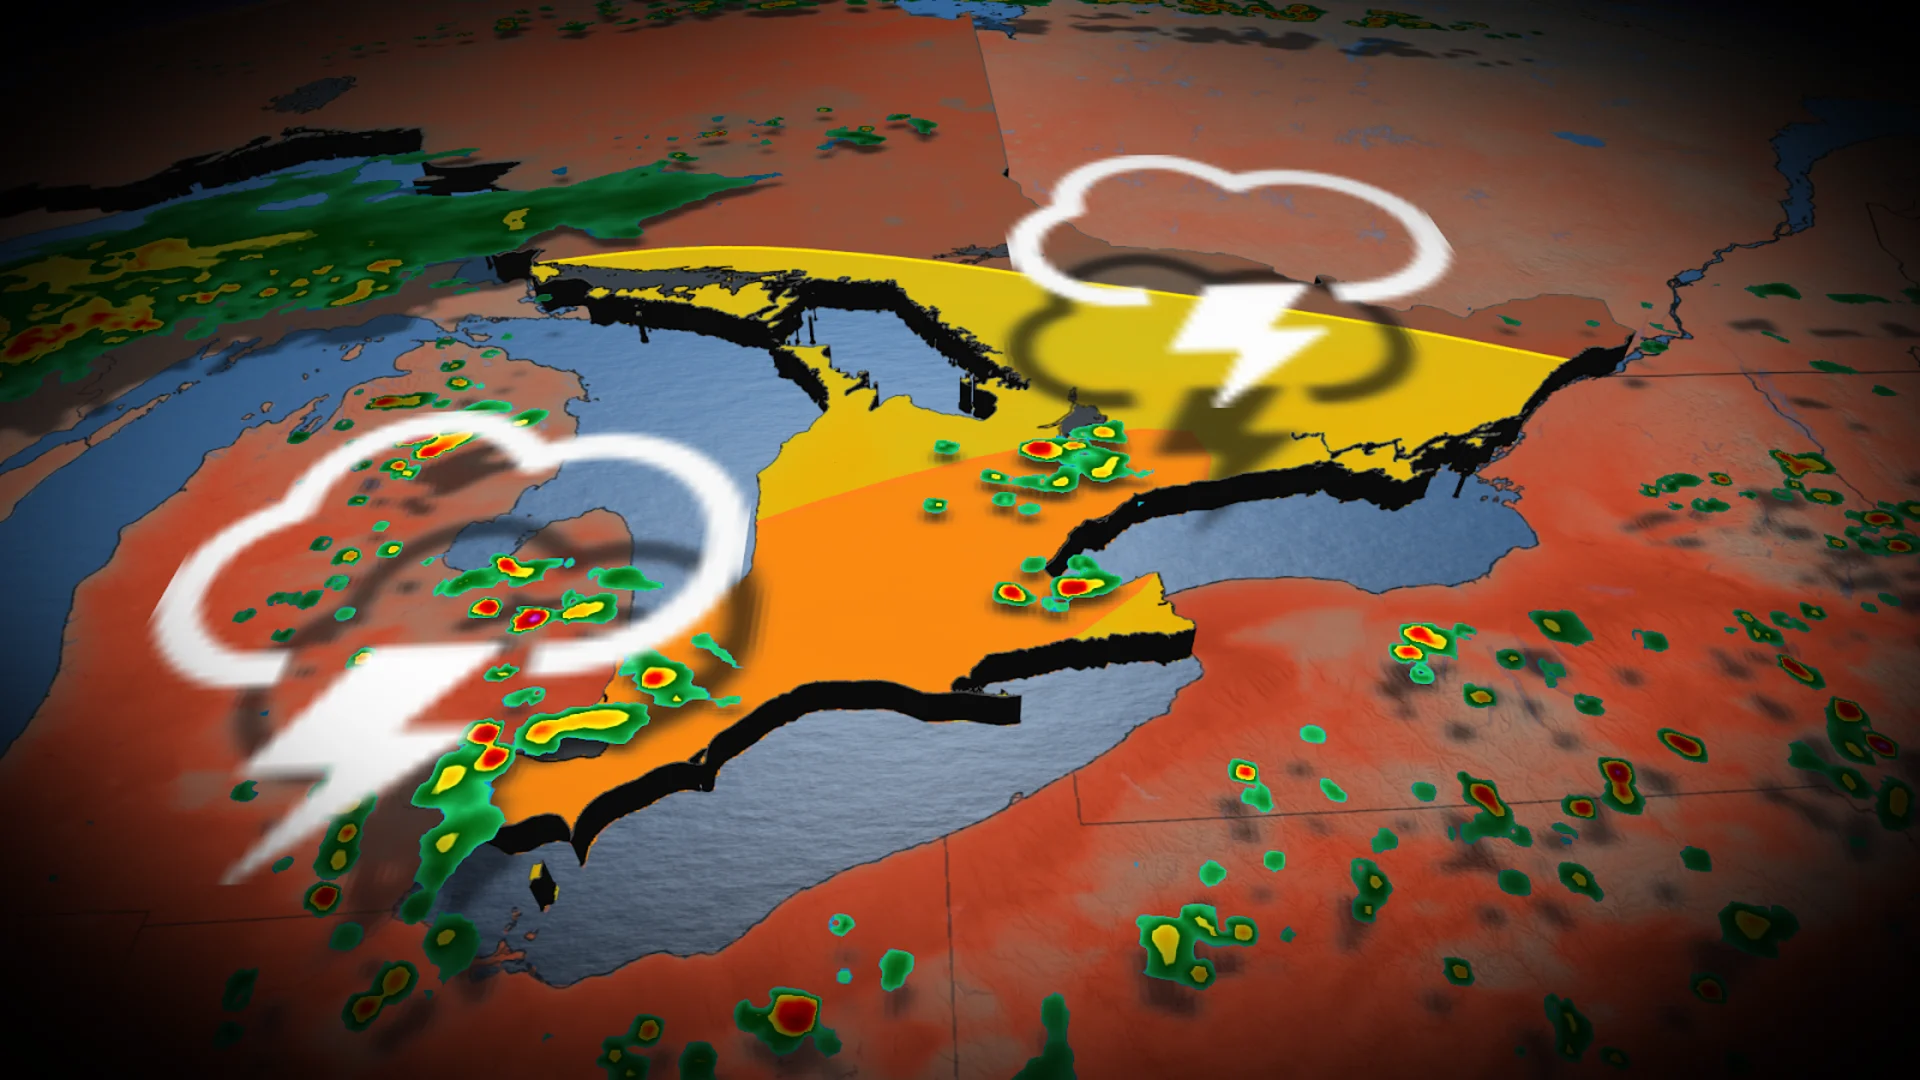 Torrential downpours may lead to flooding around the Greater Toronto Area as severe storms target southern Ontario on Friday. Details, here